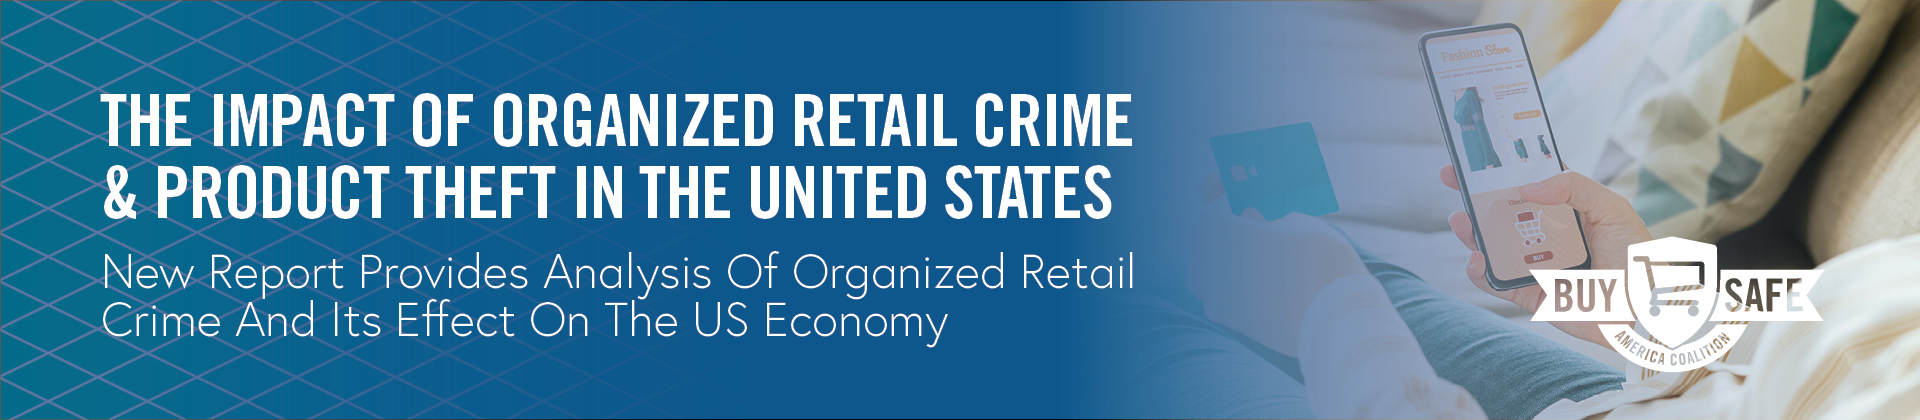 The Impact of Organized Retail Counterfeit Products and Stolen Goods